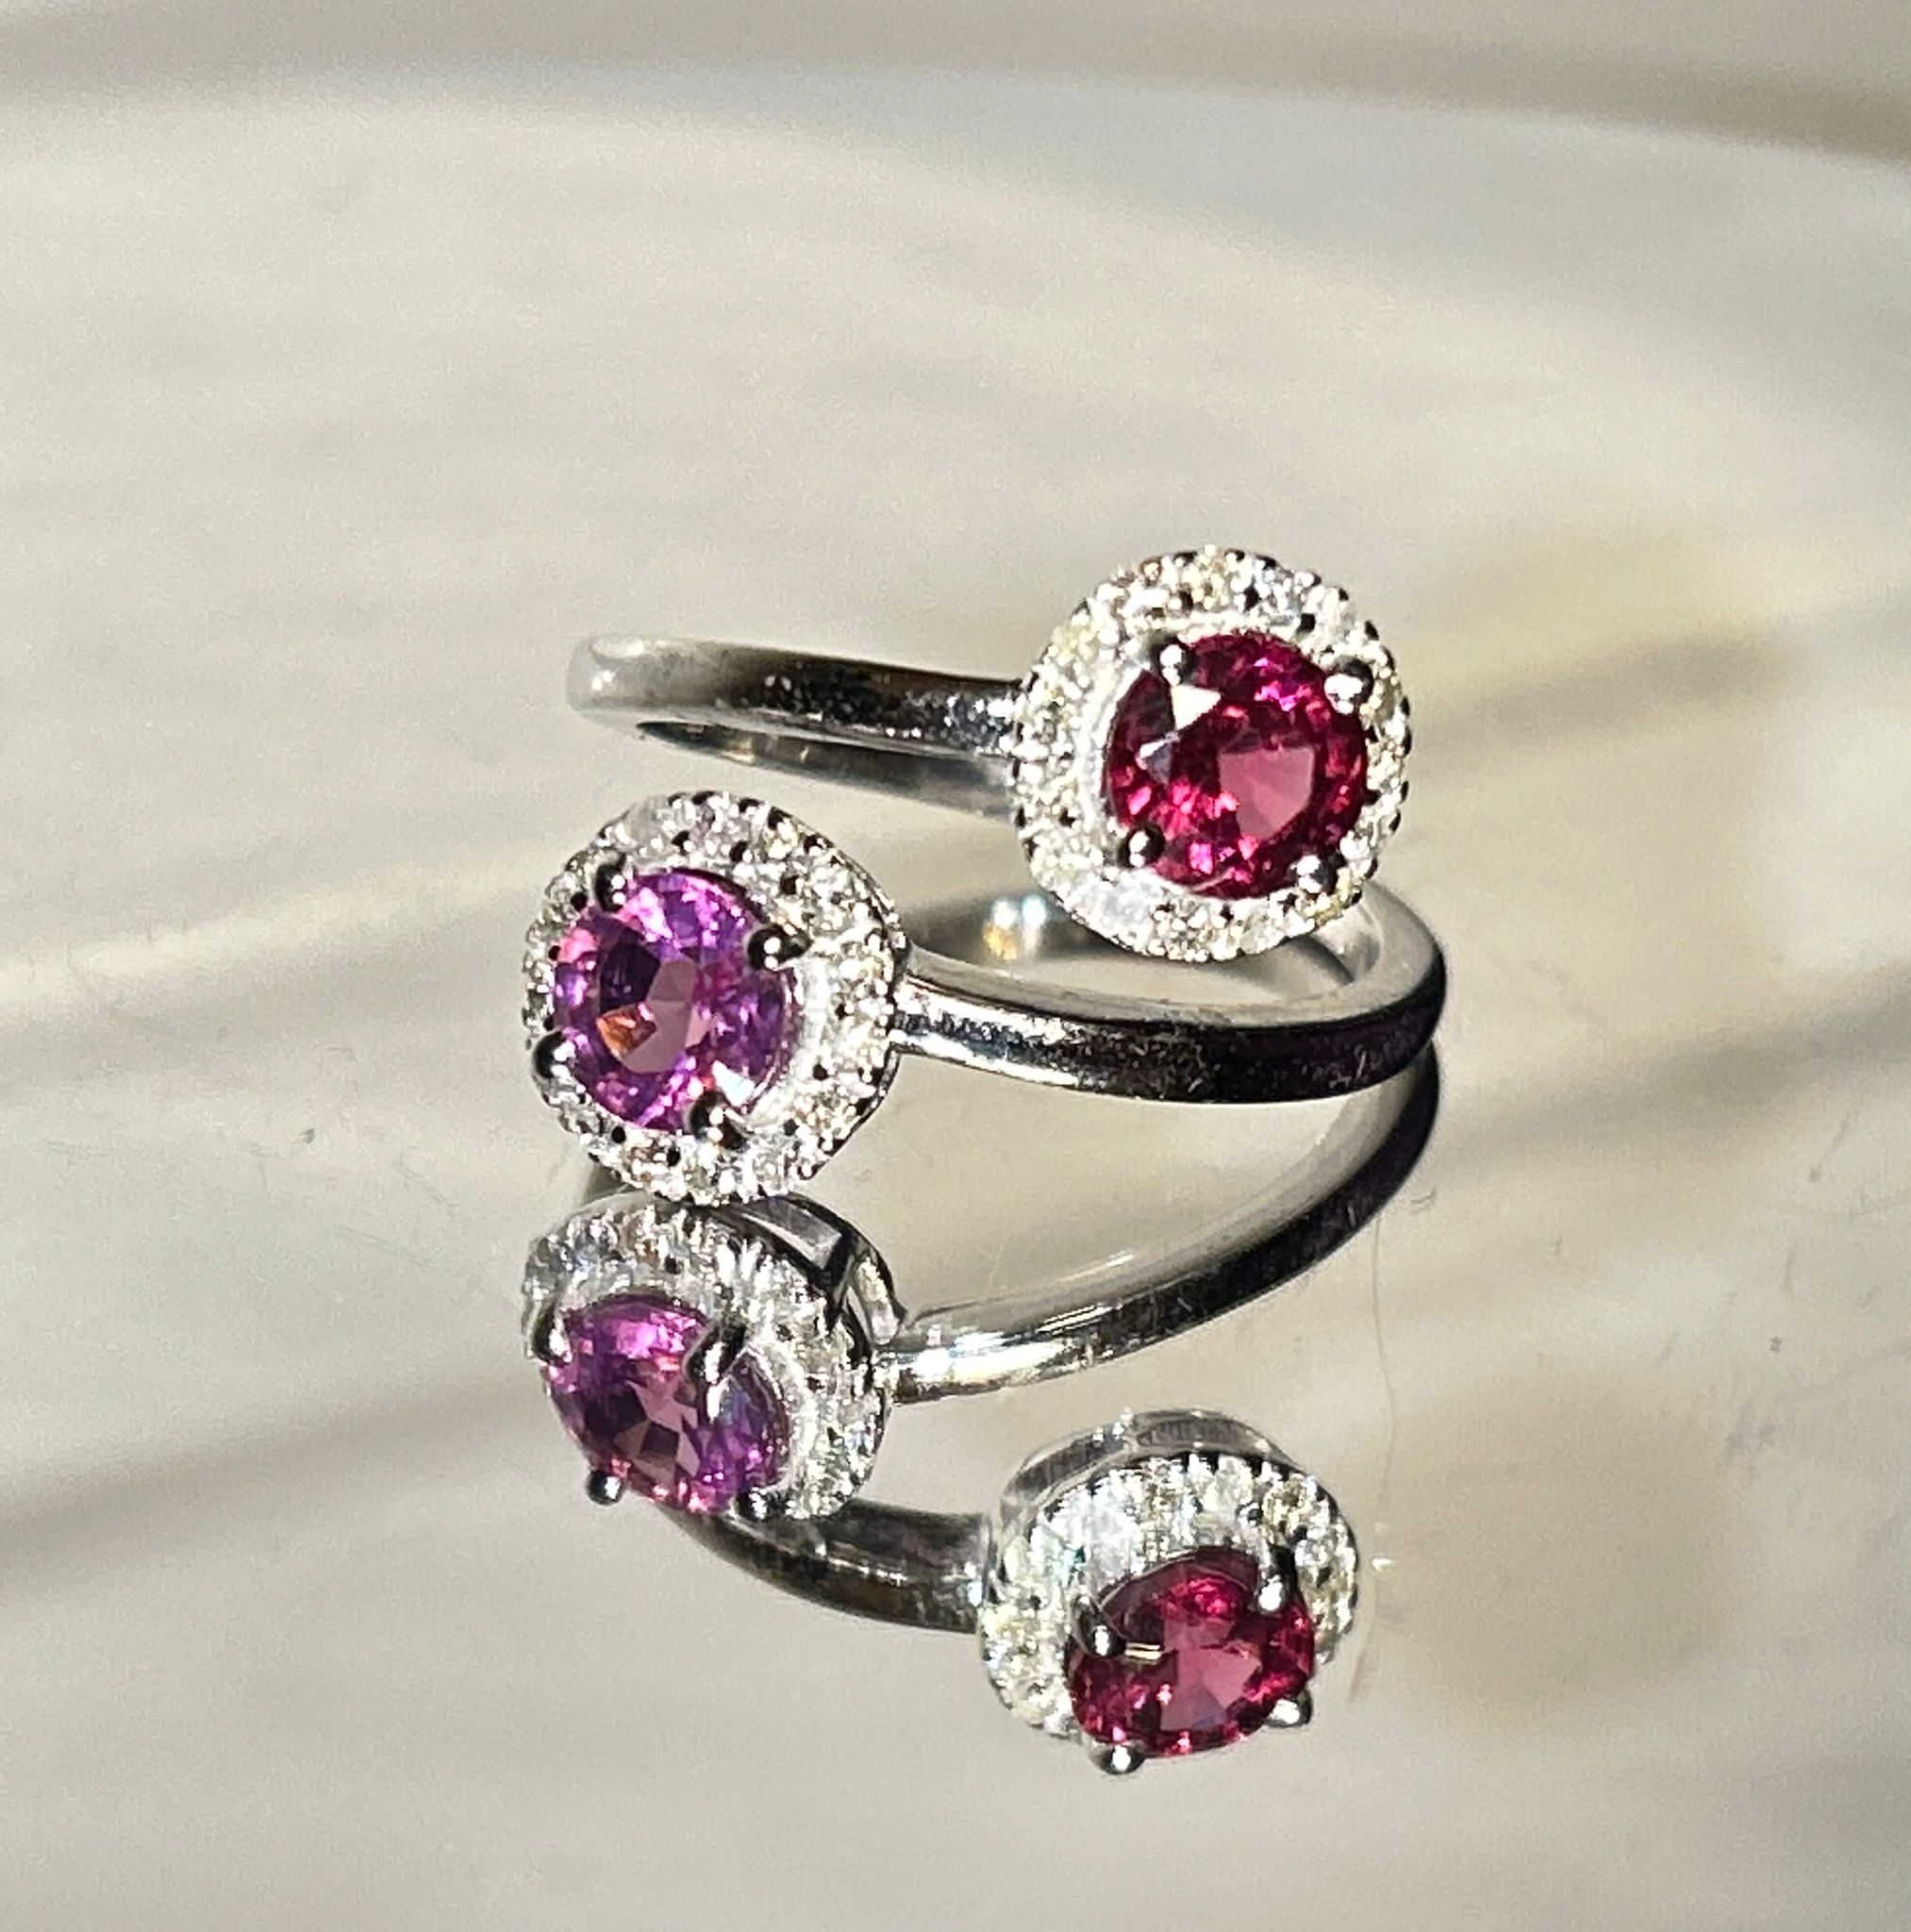 Beautiful Natural Spinel Ring With Diamonds and 18k Gold